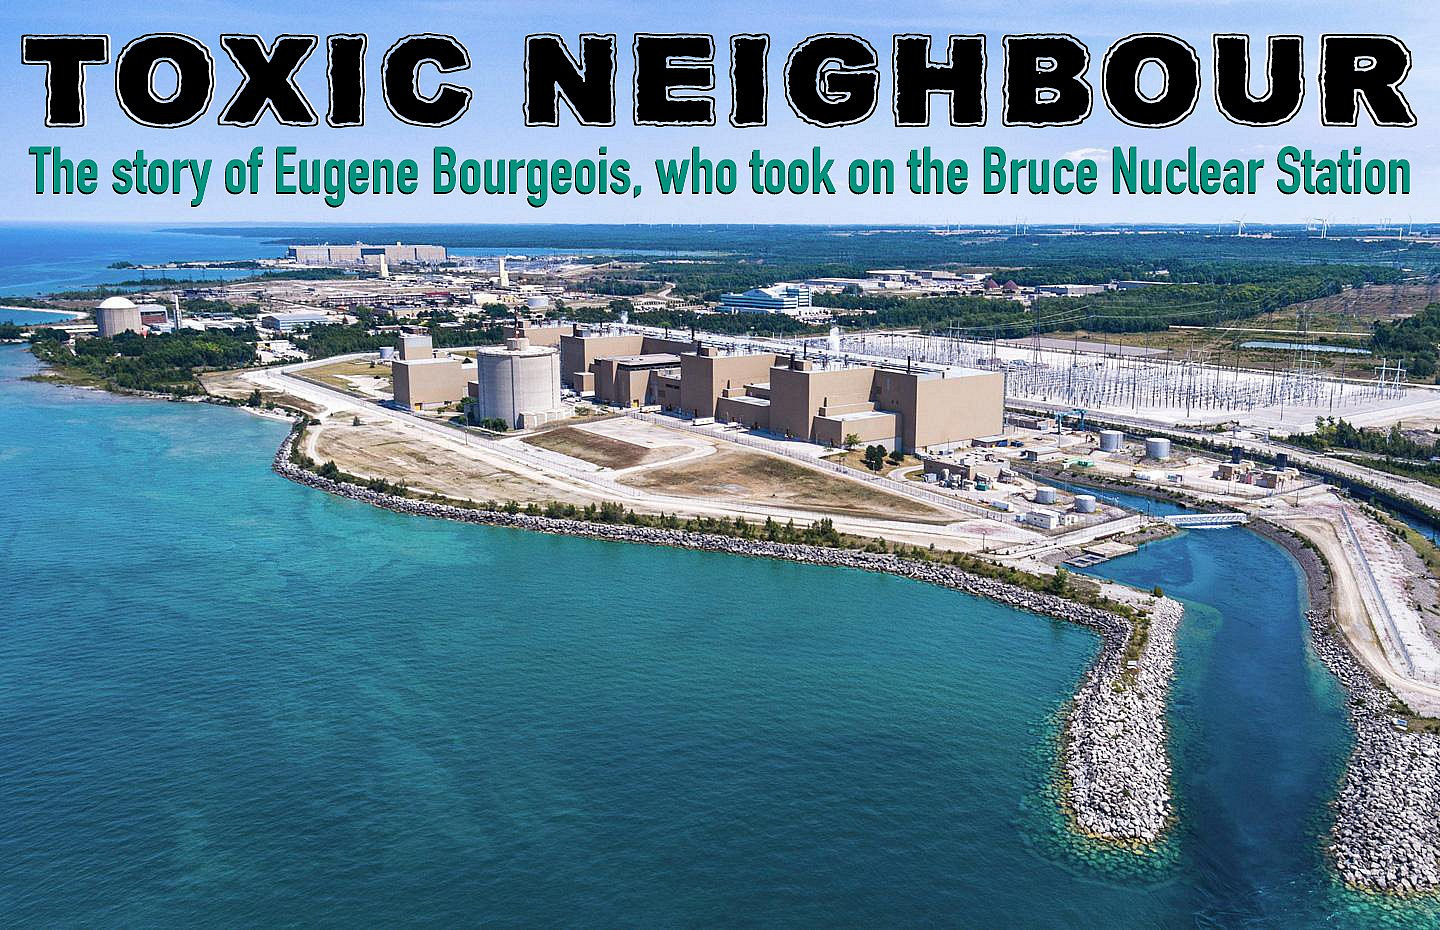 Toxic Neighbour - Bruce Nuclear Station (FILM banners)